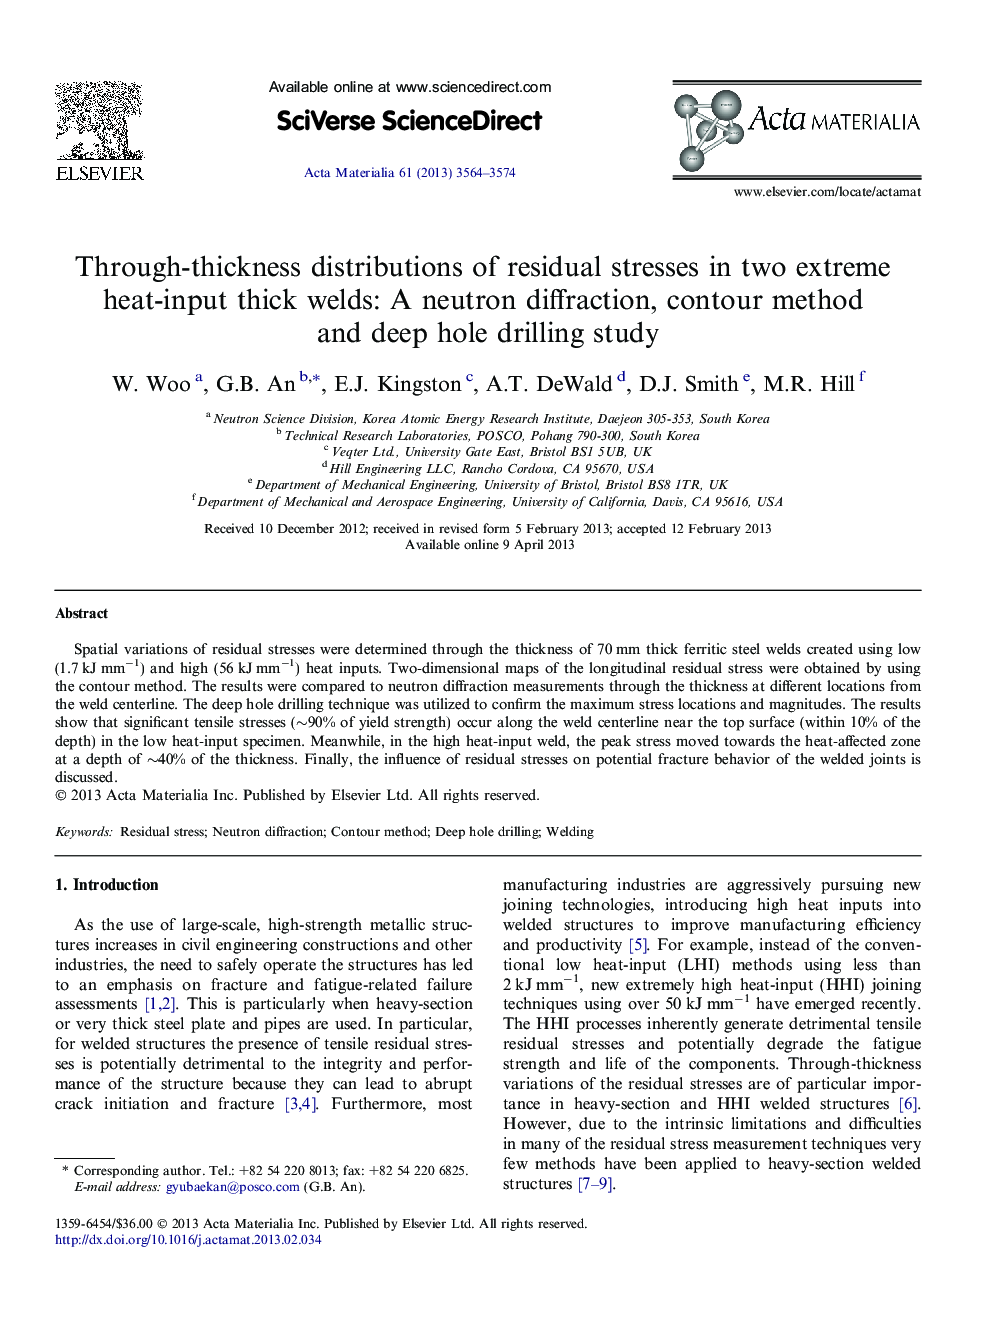 Through-thickness distributions of residual stresses in two extreme heat-input thick welds: A neutron diffraction, contour method and deep hole drilling study